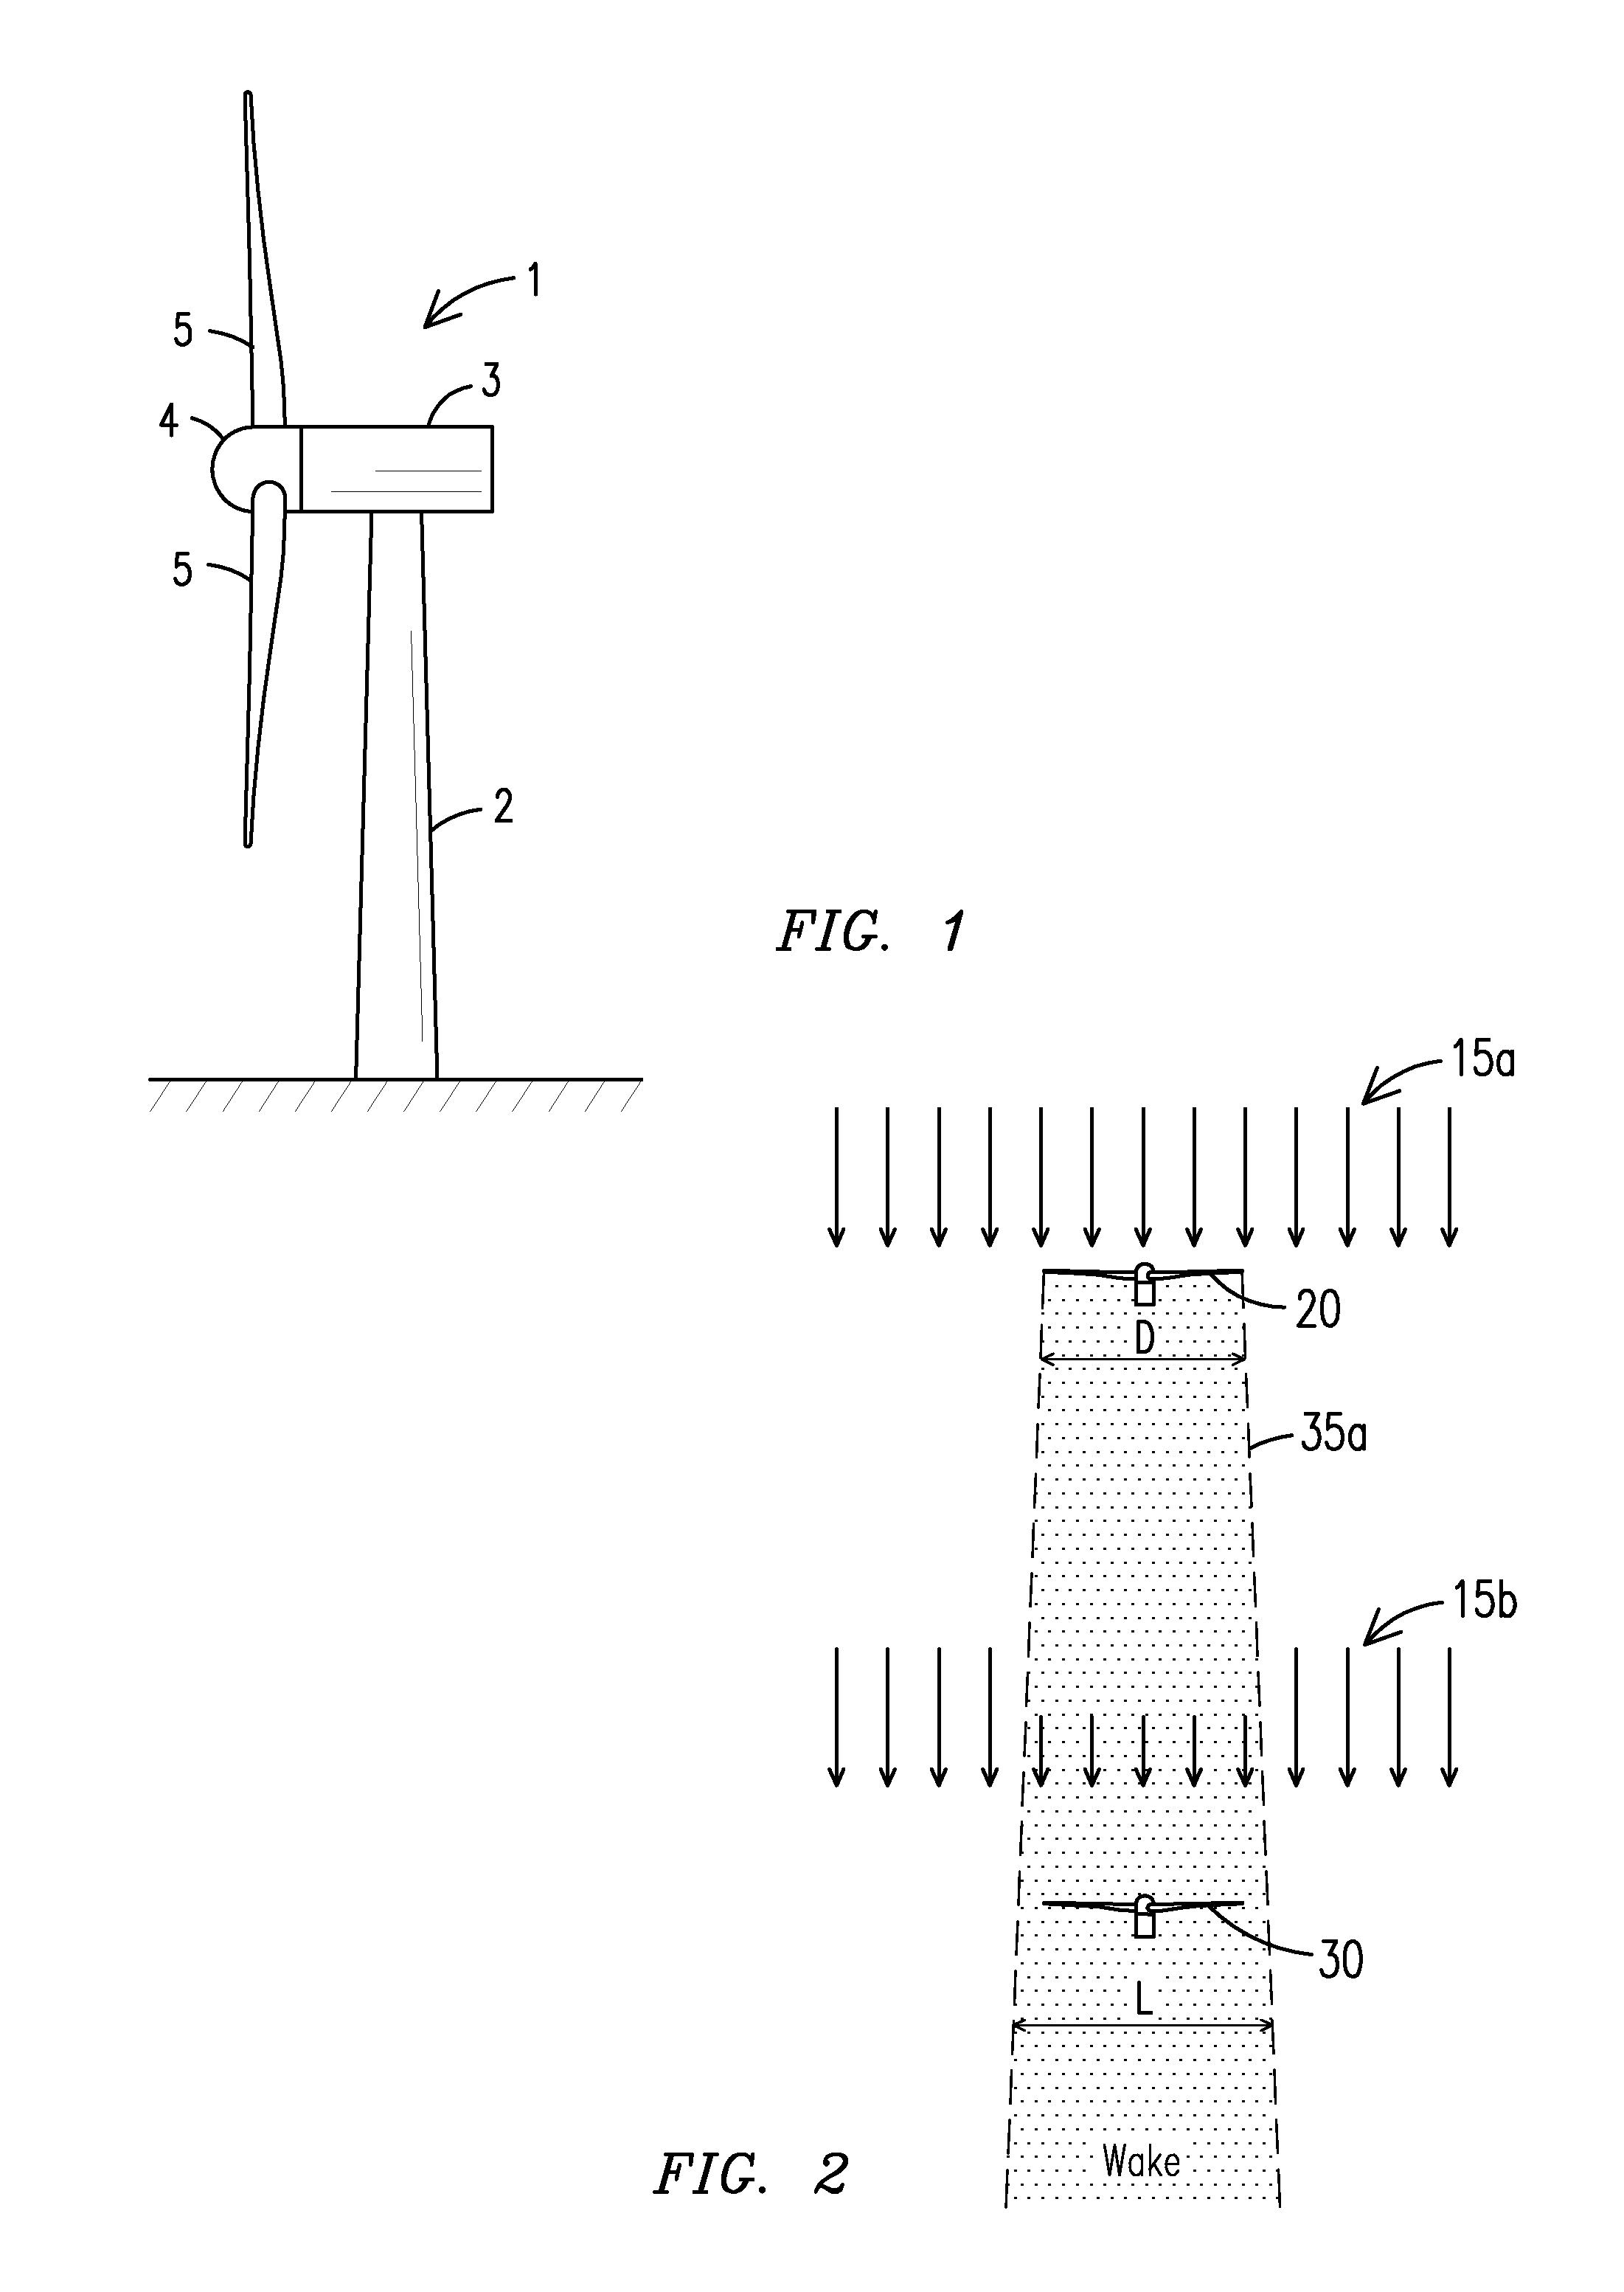 Method and system for improving wind farm power production efficiency